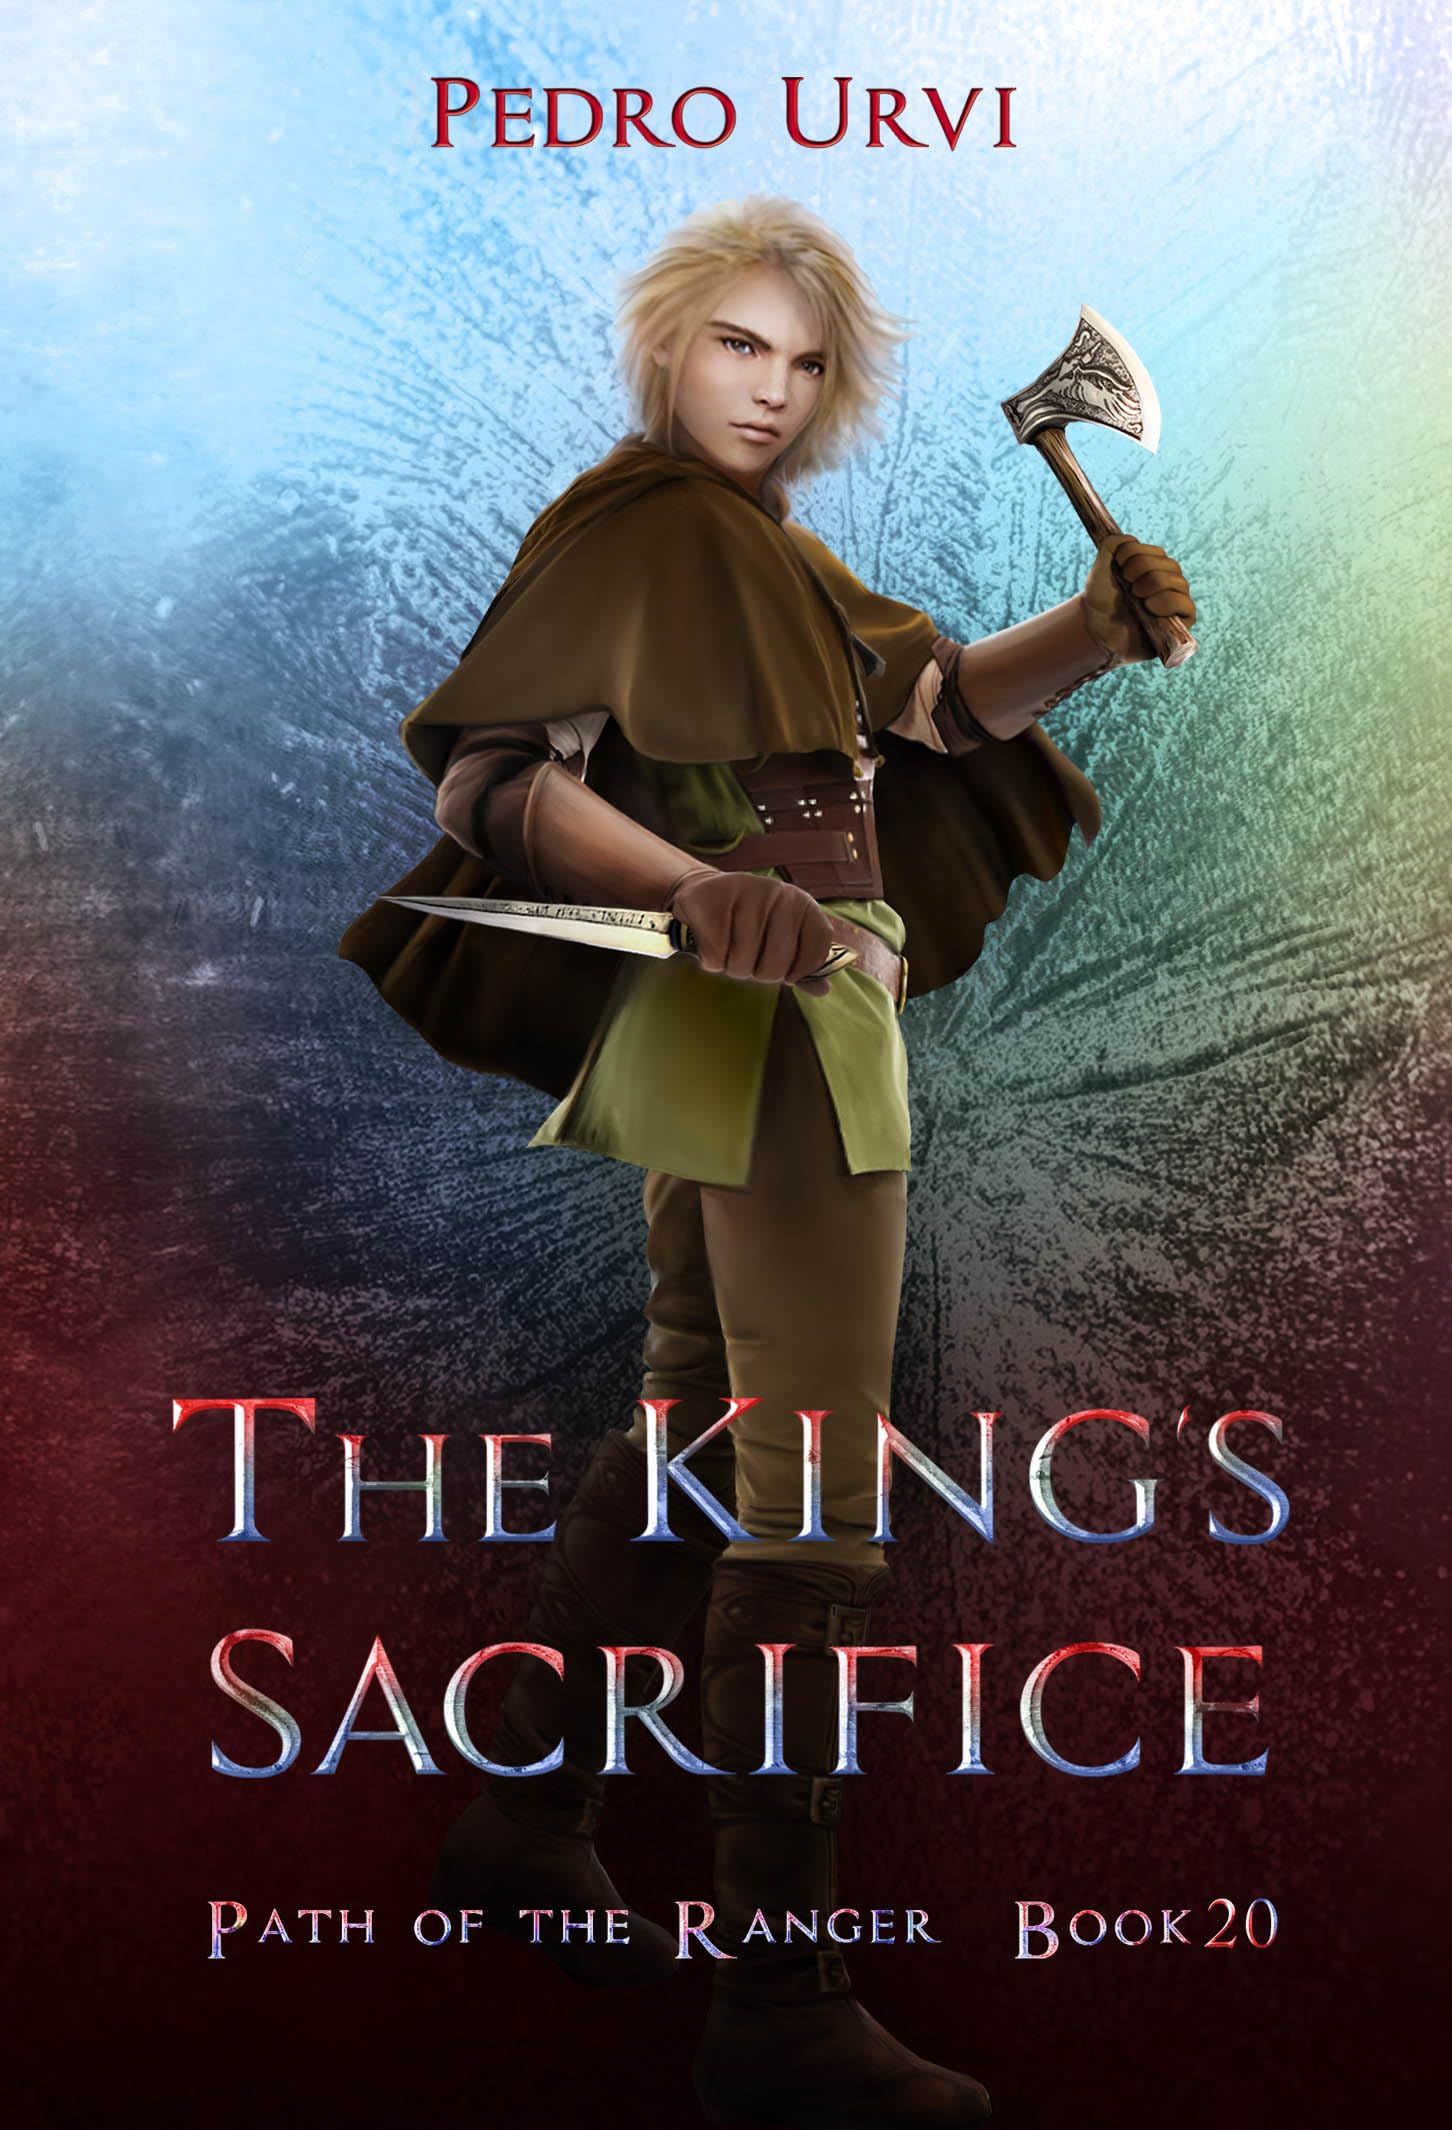 The King's Sacrifice: (Path of the Ranger Book 20)